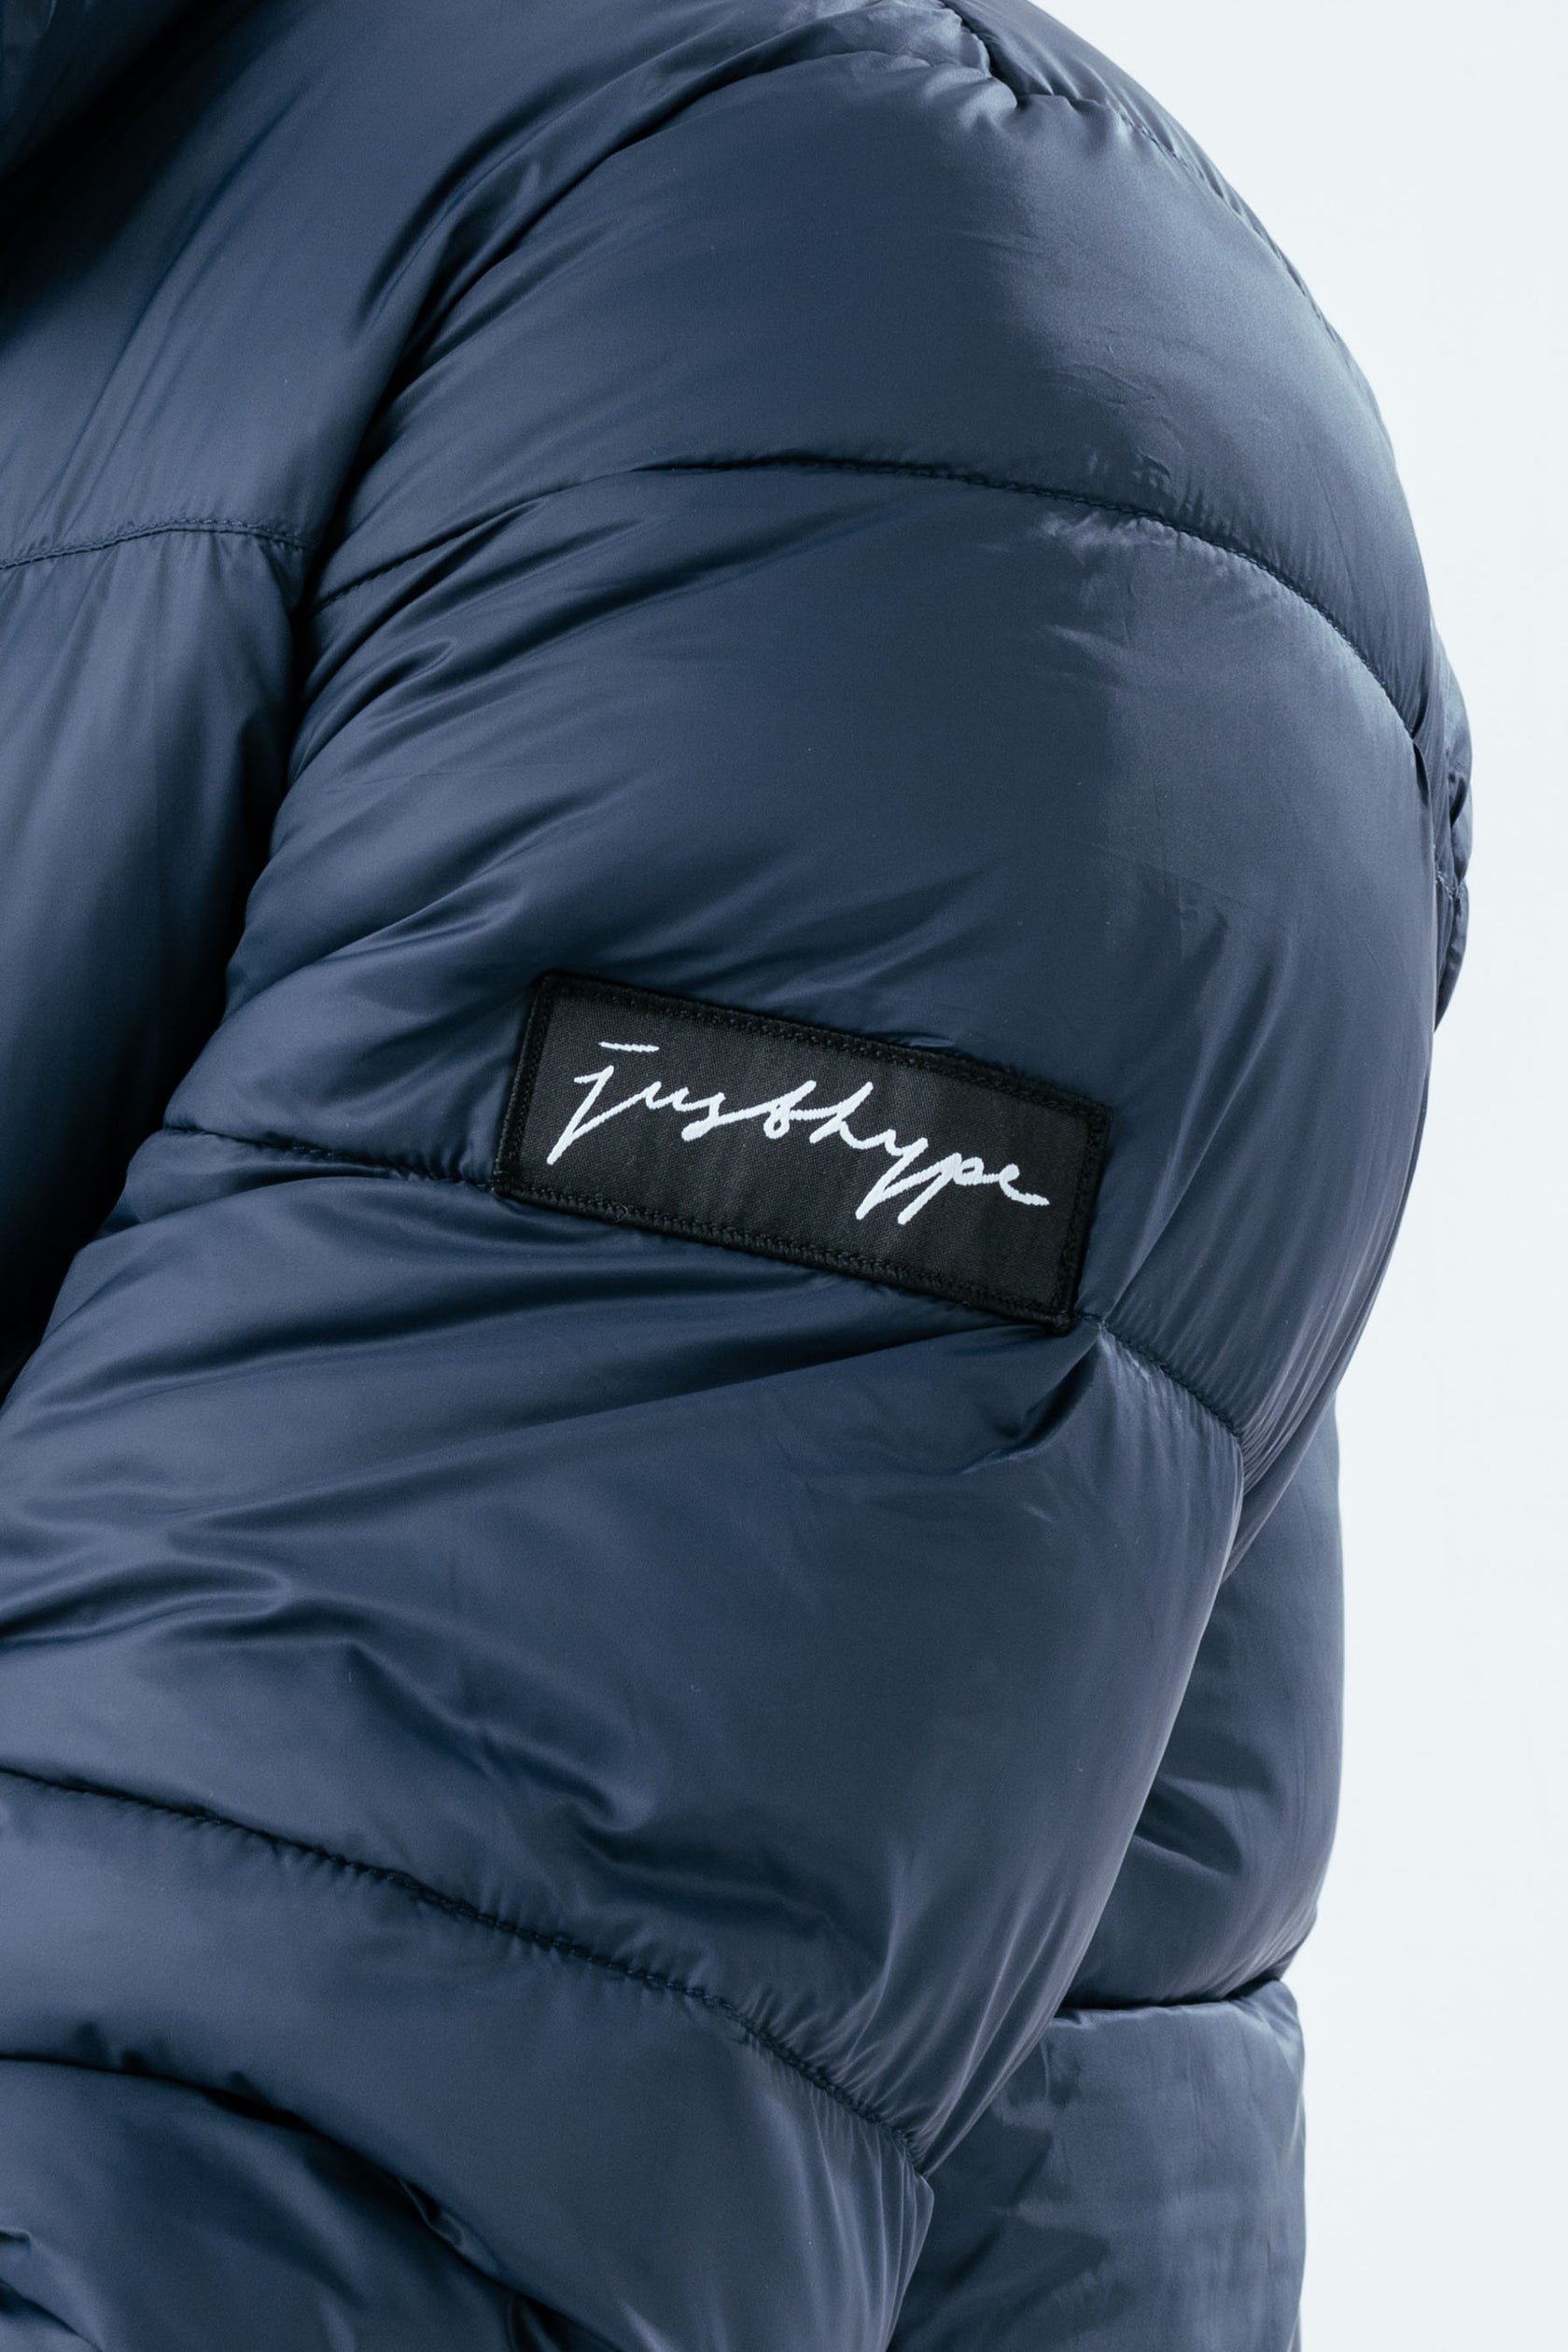 HYPE DEEP FILLED NAVY PUFFER ADULT JACKET | Hype.